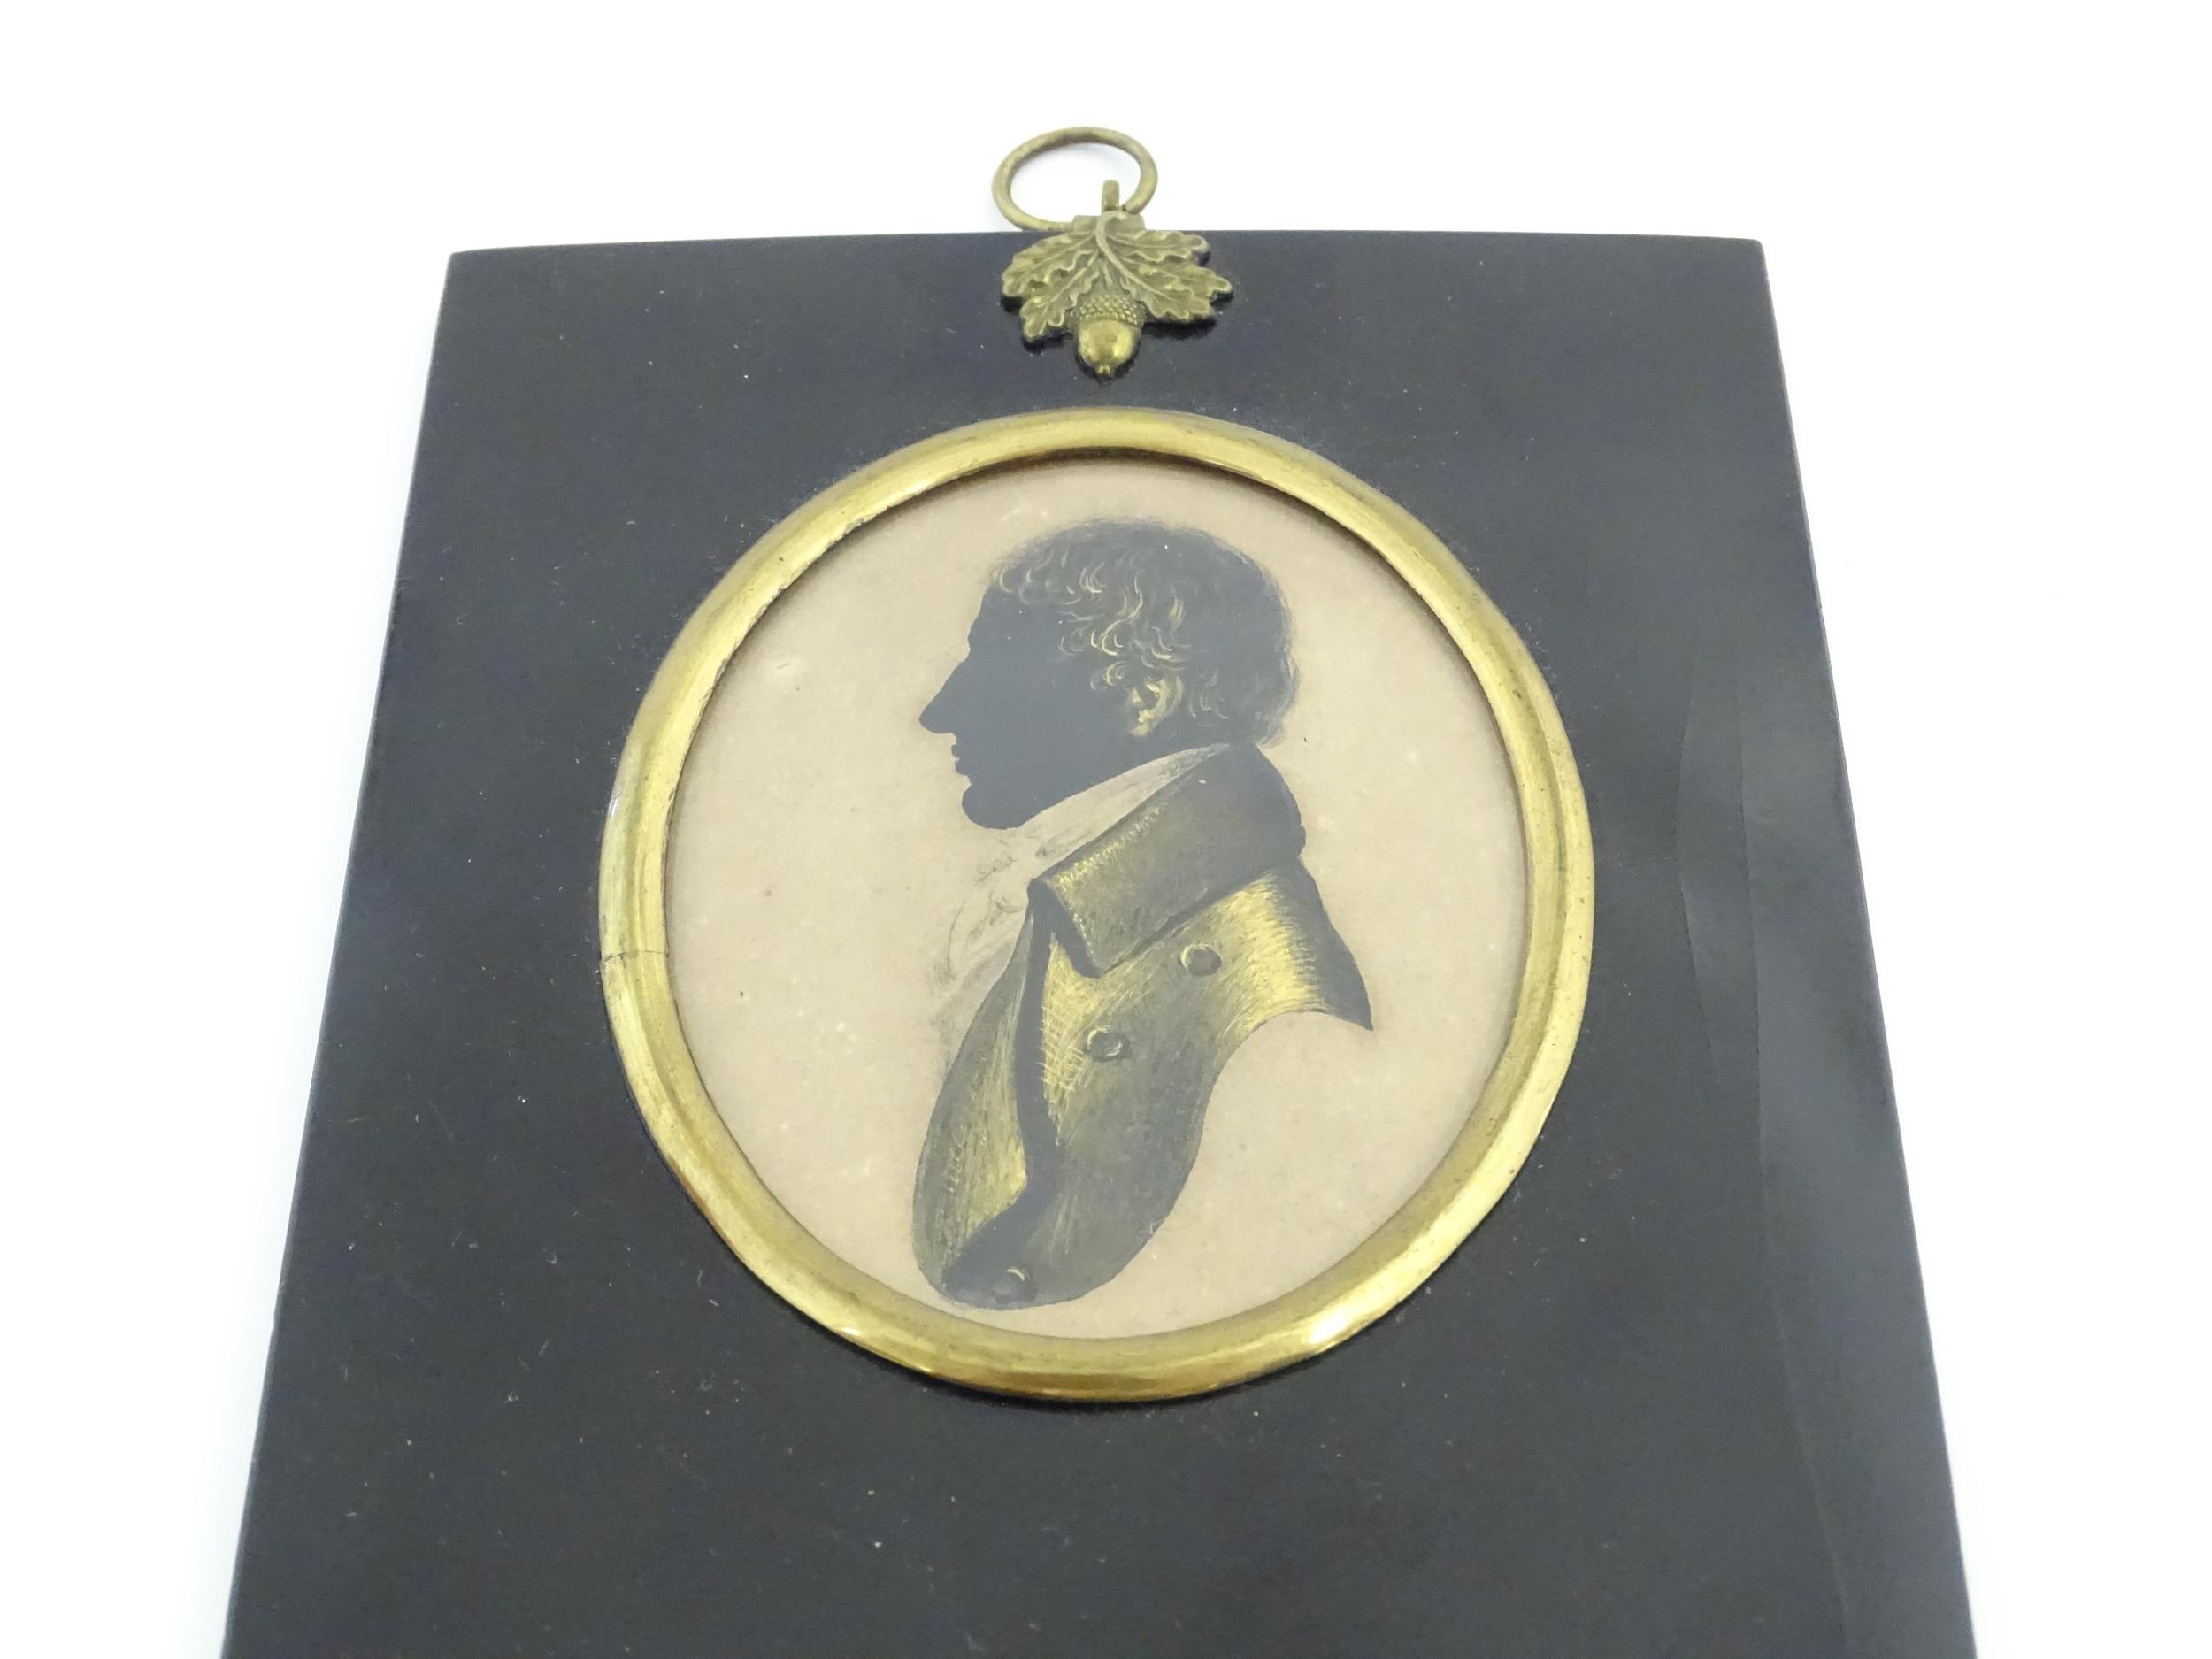 A 19thC silhouette portrait miniature depicting Charles Lamb, aged 23, with gilt highlights, after - Image 4 of 6